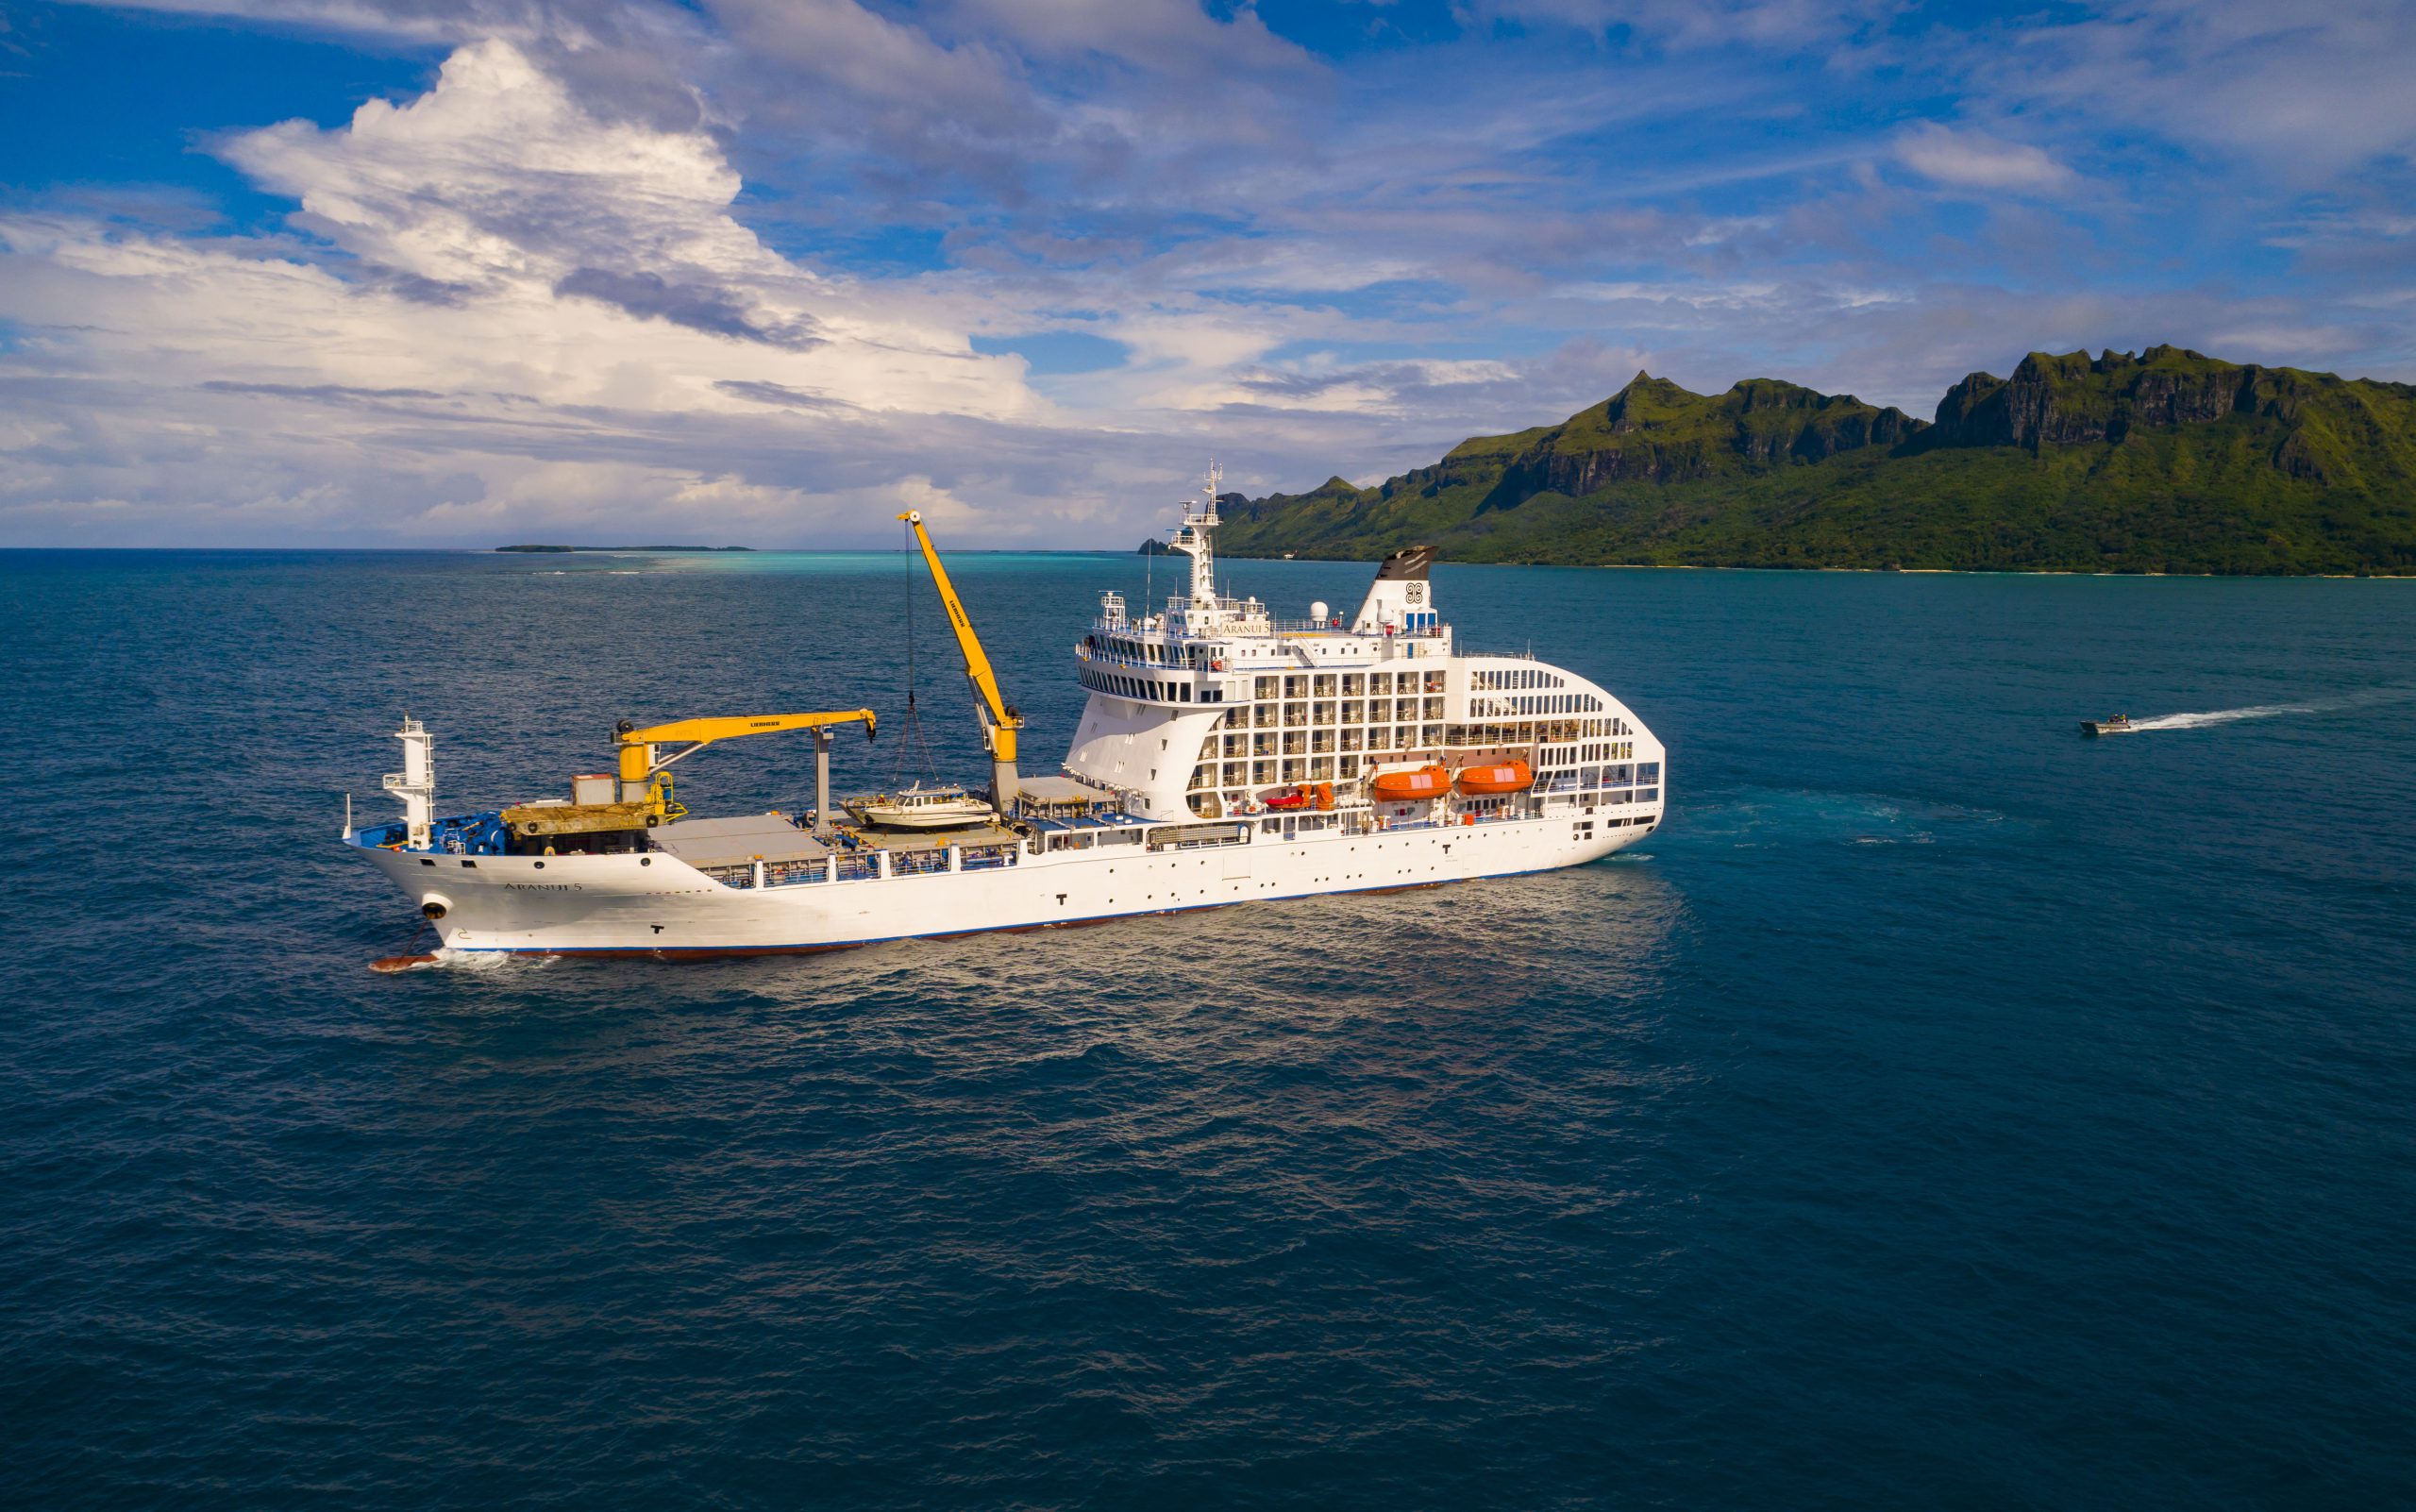 Aranui launches 25 voyages in the South Pacific in 2023 with up to 15 per cent discounts